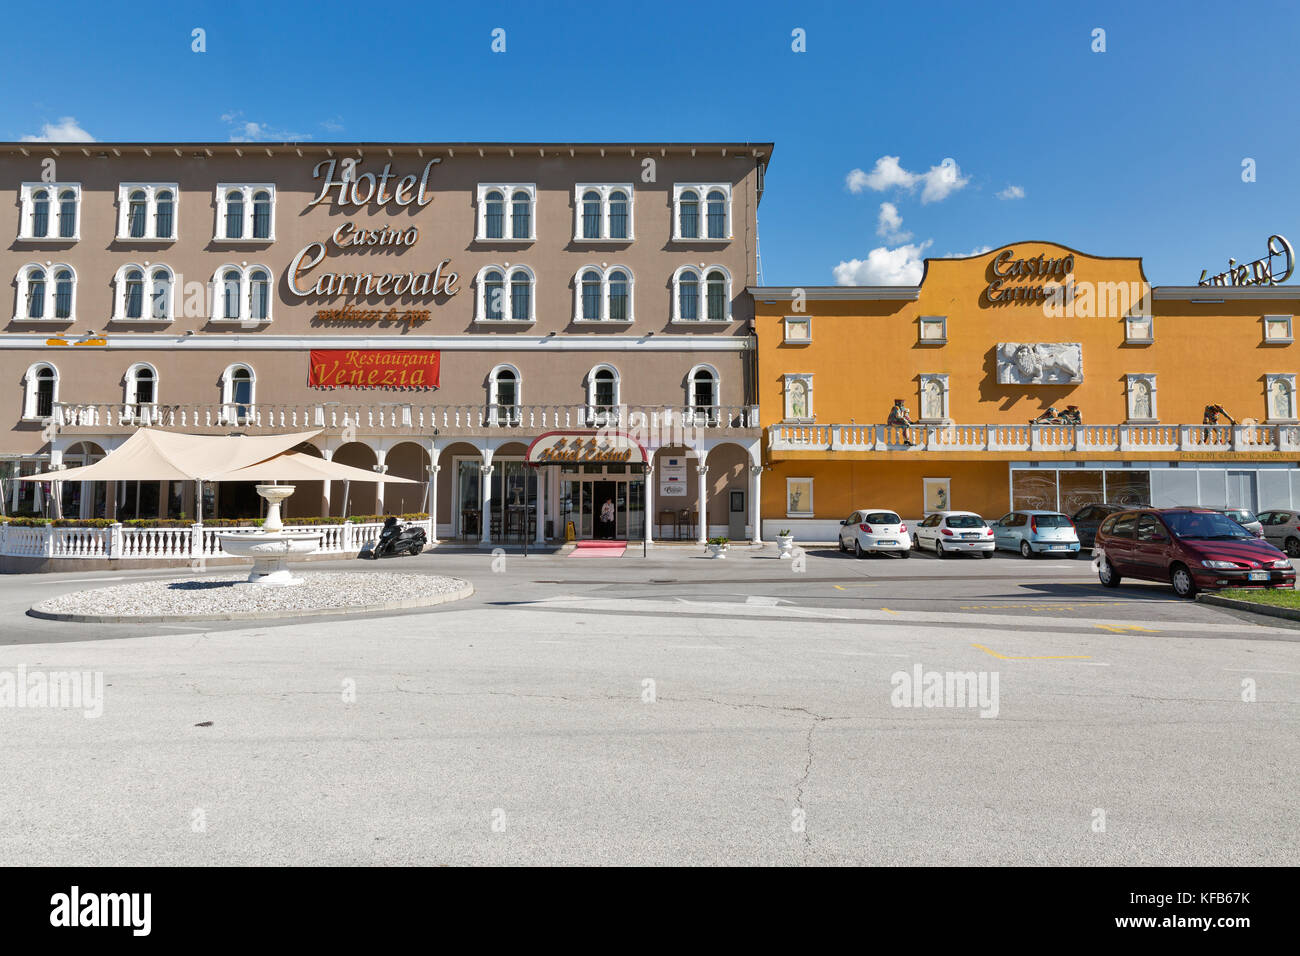 SKOFIJE, SLOVENIA - SEPTEMBER 21, 2017: Cars parked in front of welness and spa Hotel Casino Carnevale close to highway on the border between Slovenia Stock Photo